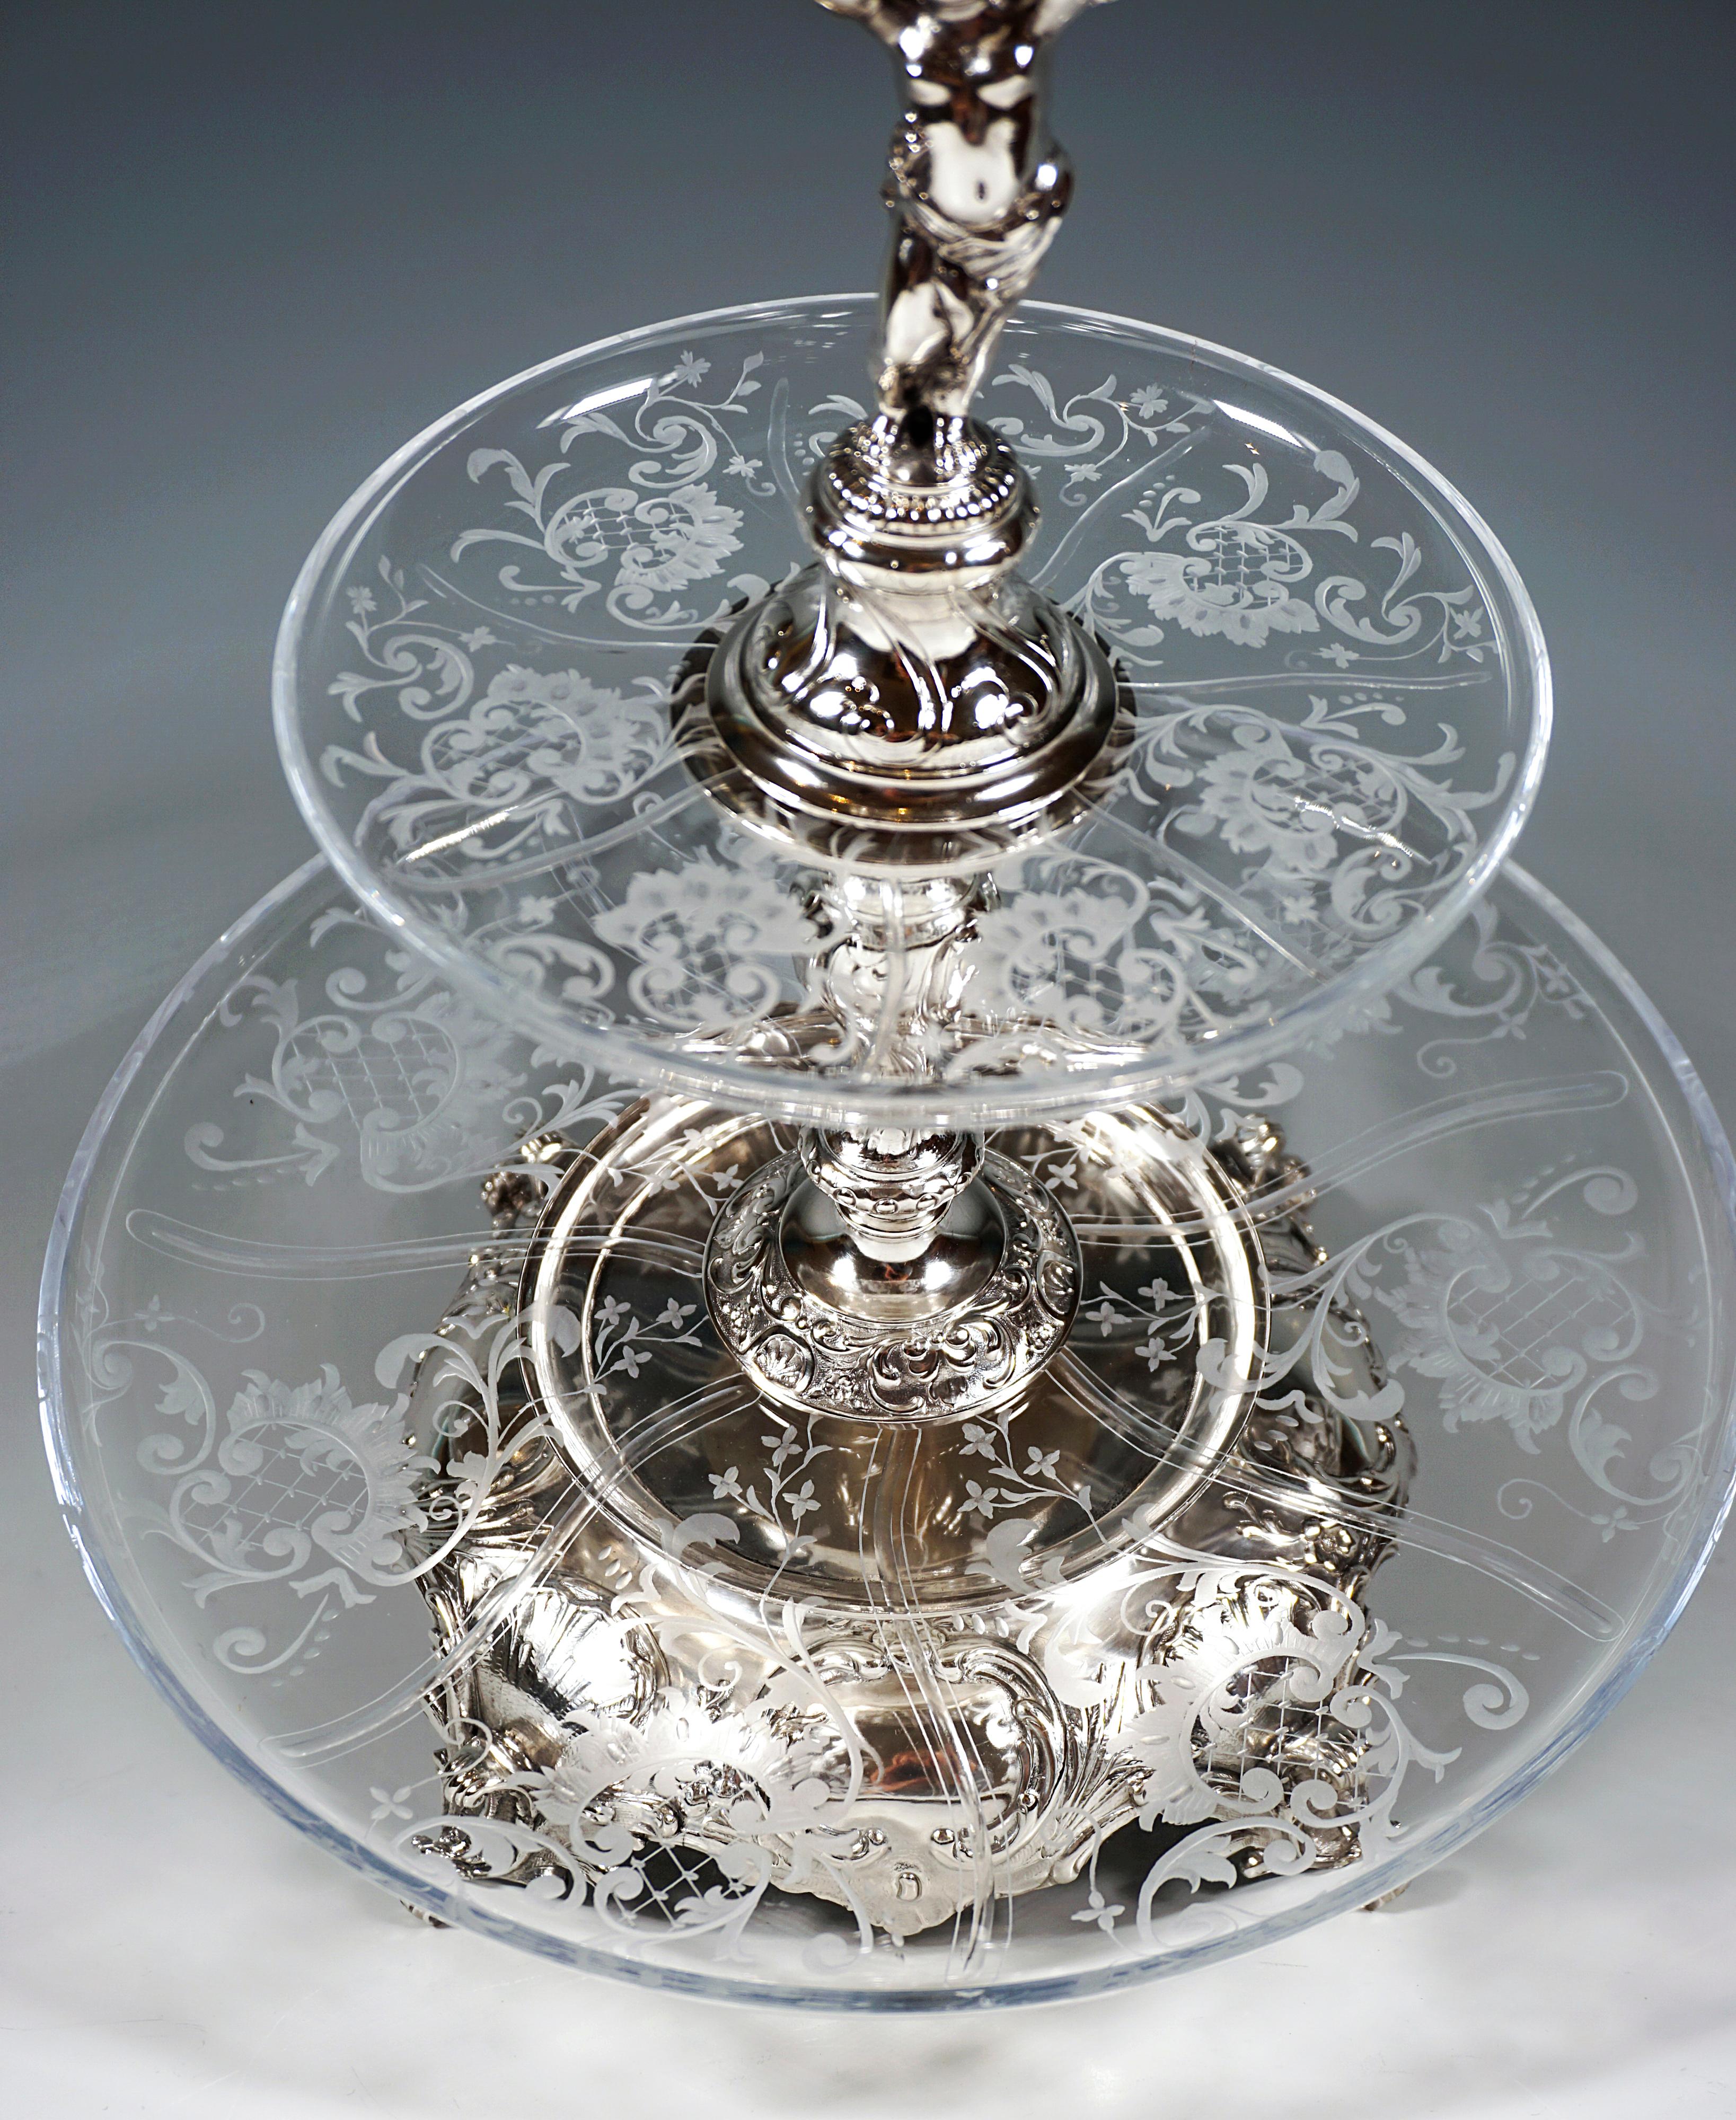 Early 20th Century Viennese Silver & Glass Art Nouveau Table Étagère by Würbel & Szokally, Ca. 1900 For Sale